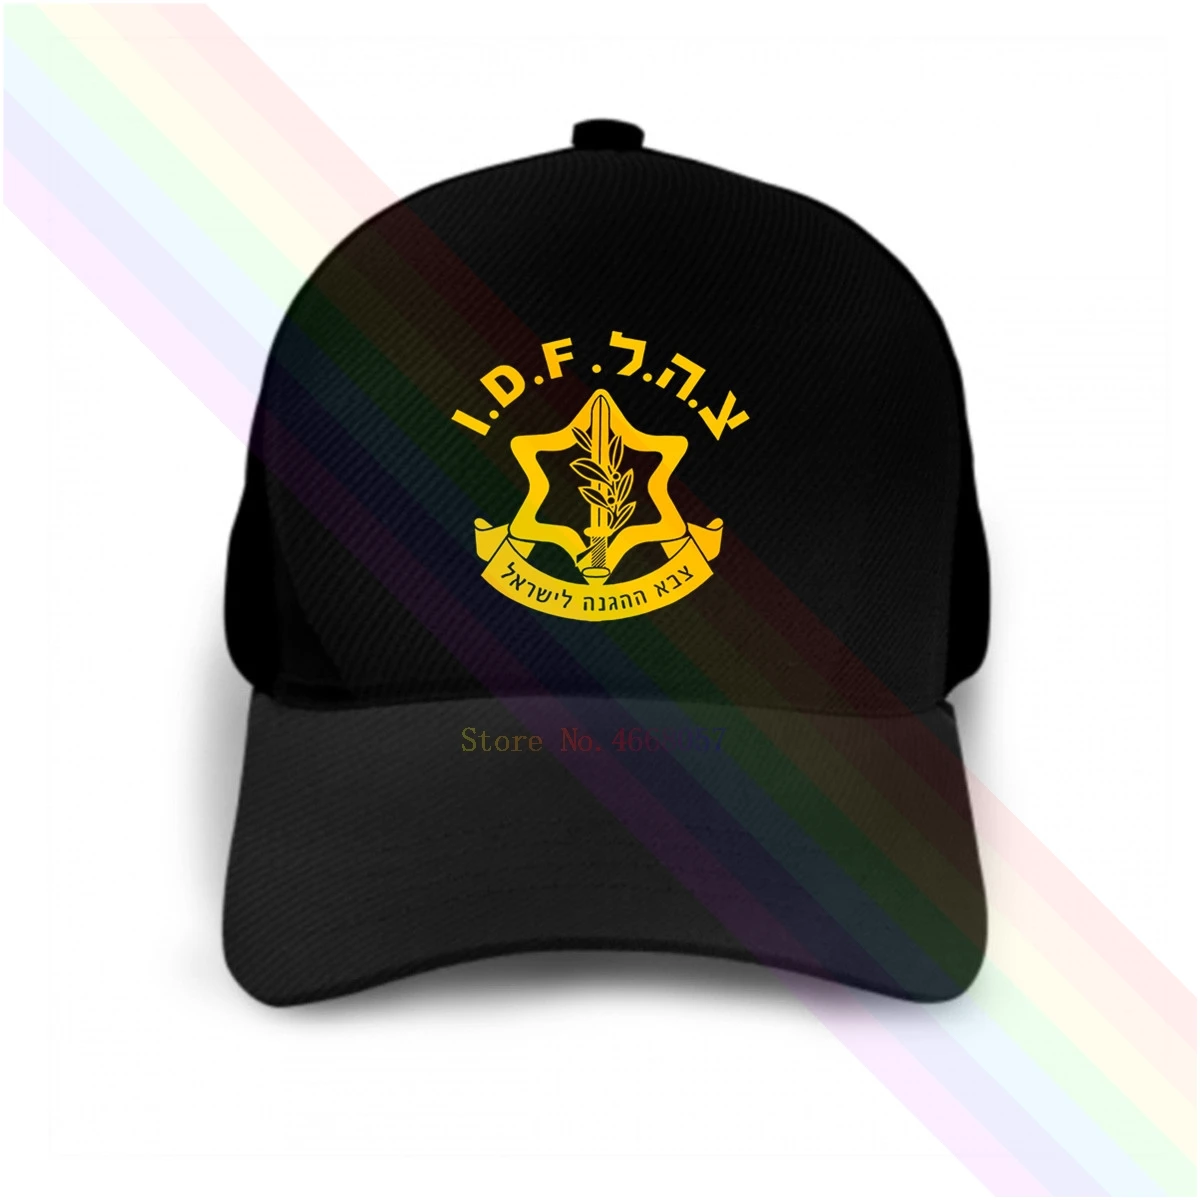 Israel Defense Forces  Dry Fit Hat Cap Green Olive Army Paratroopers Airborne 